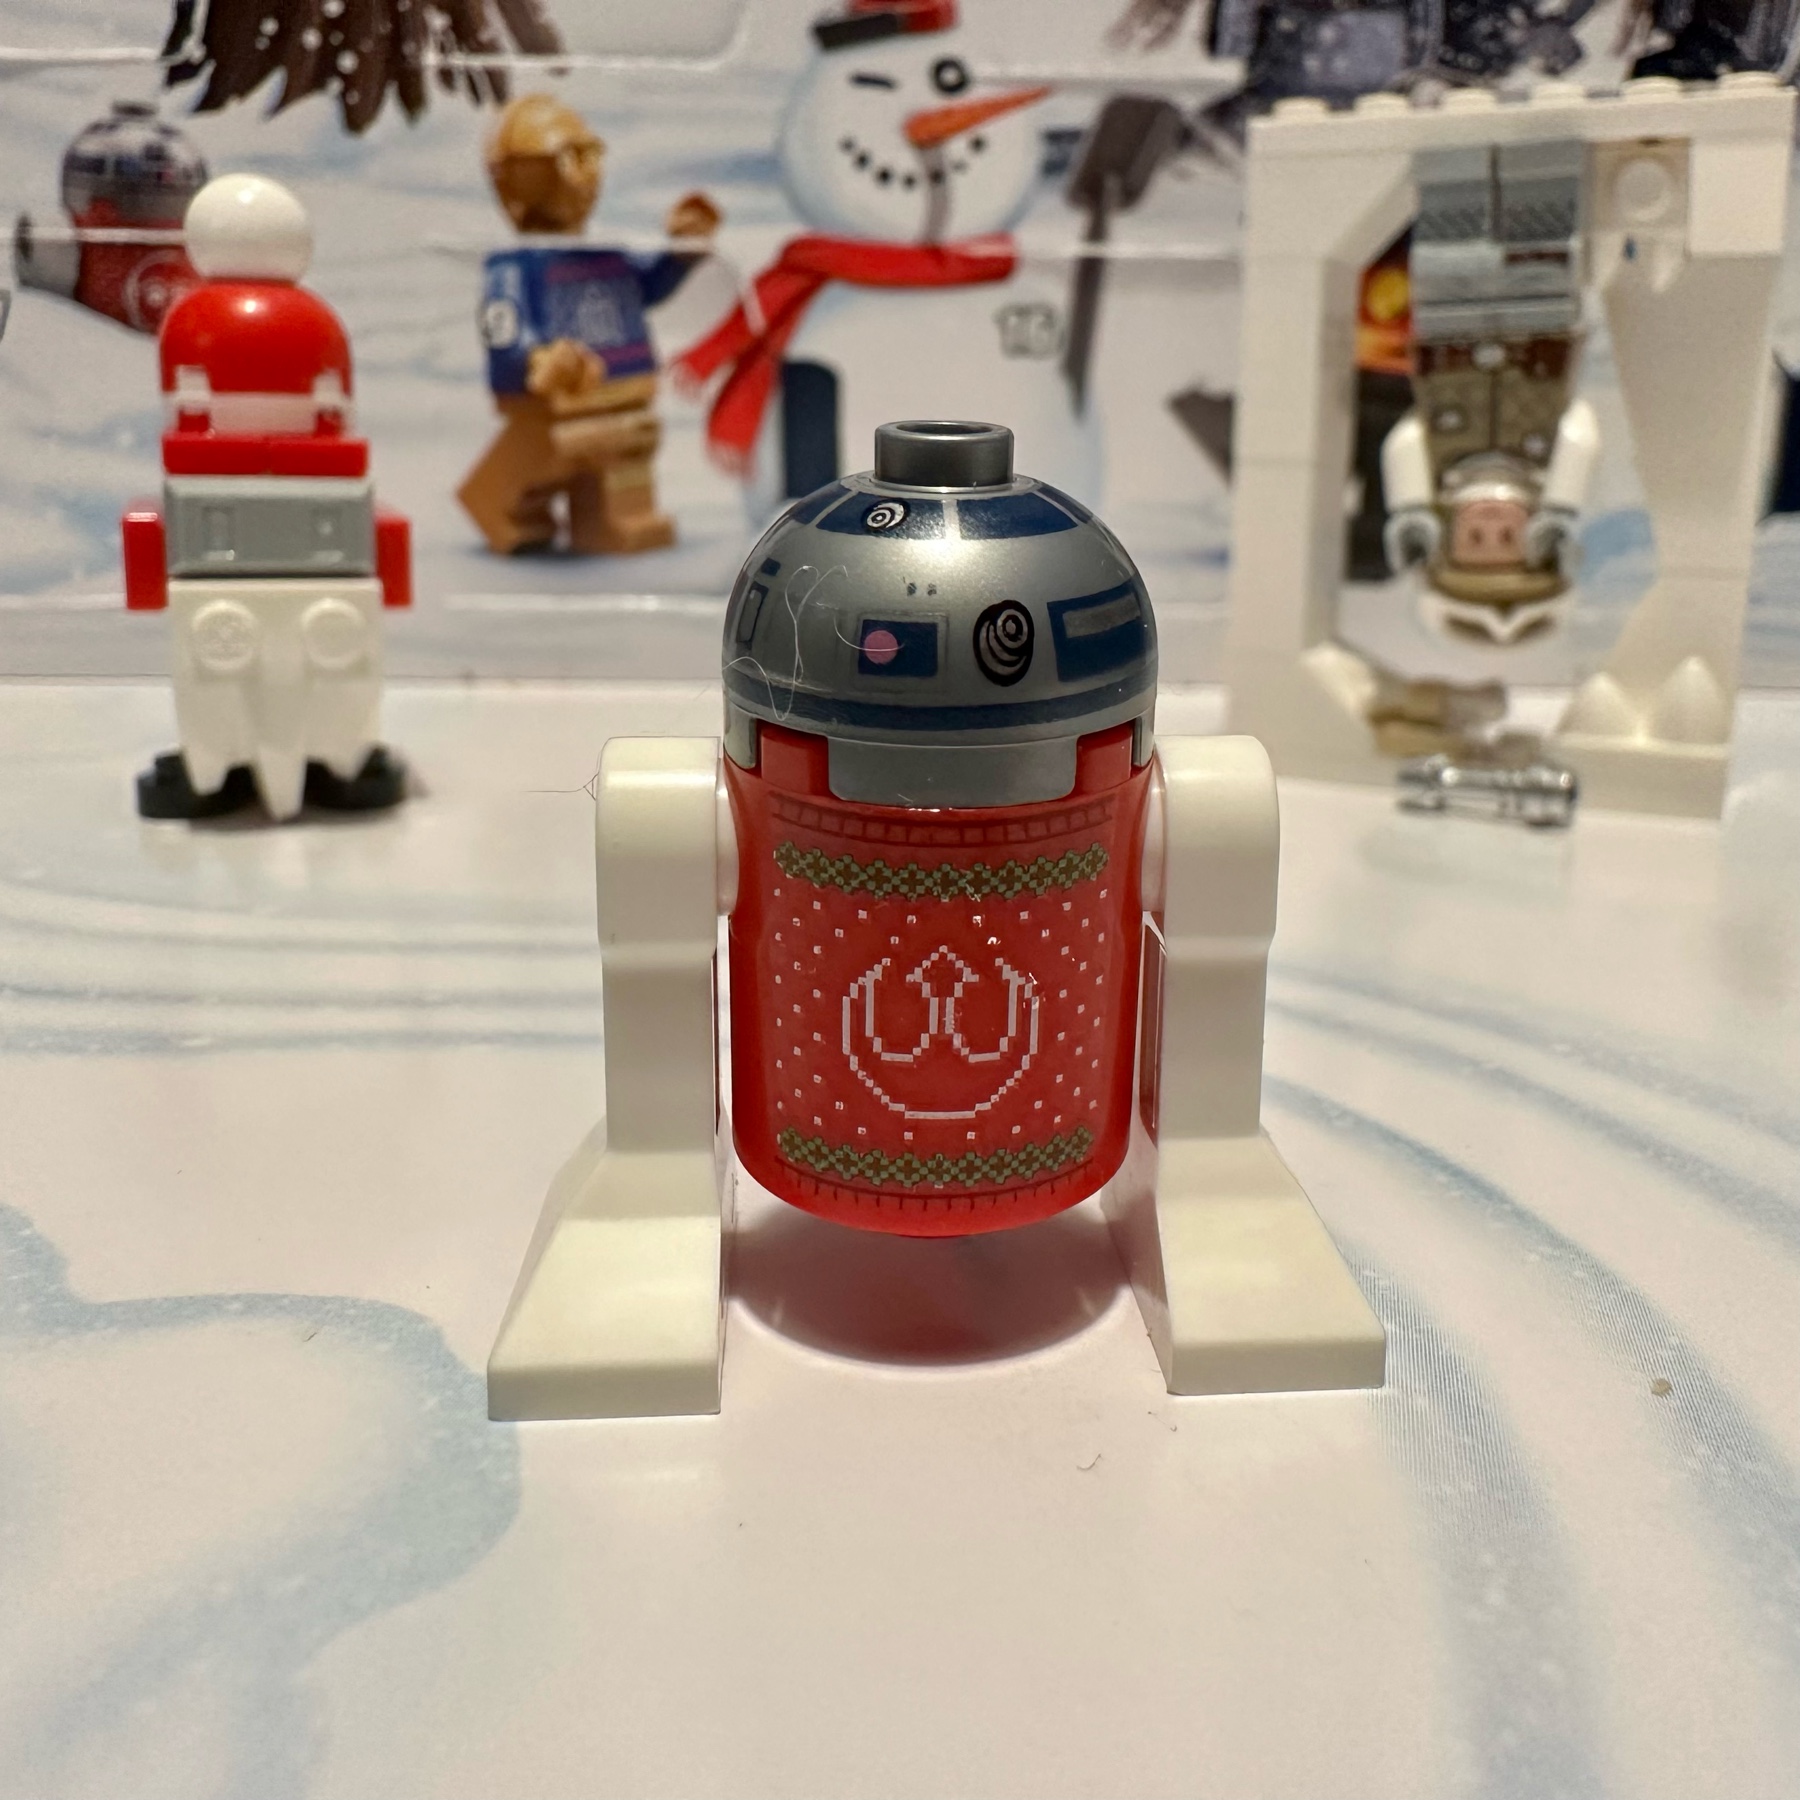 LEGO R2-D2 droid wearing an ugly sweater with a Rebel alliance pattern on the back